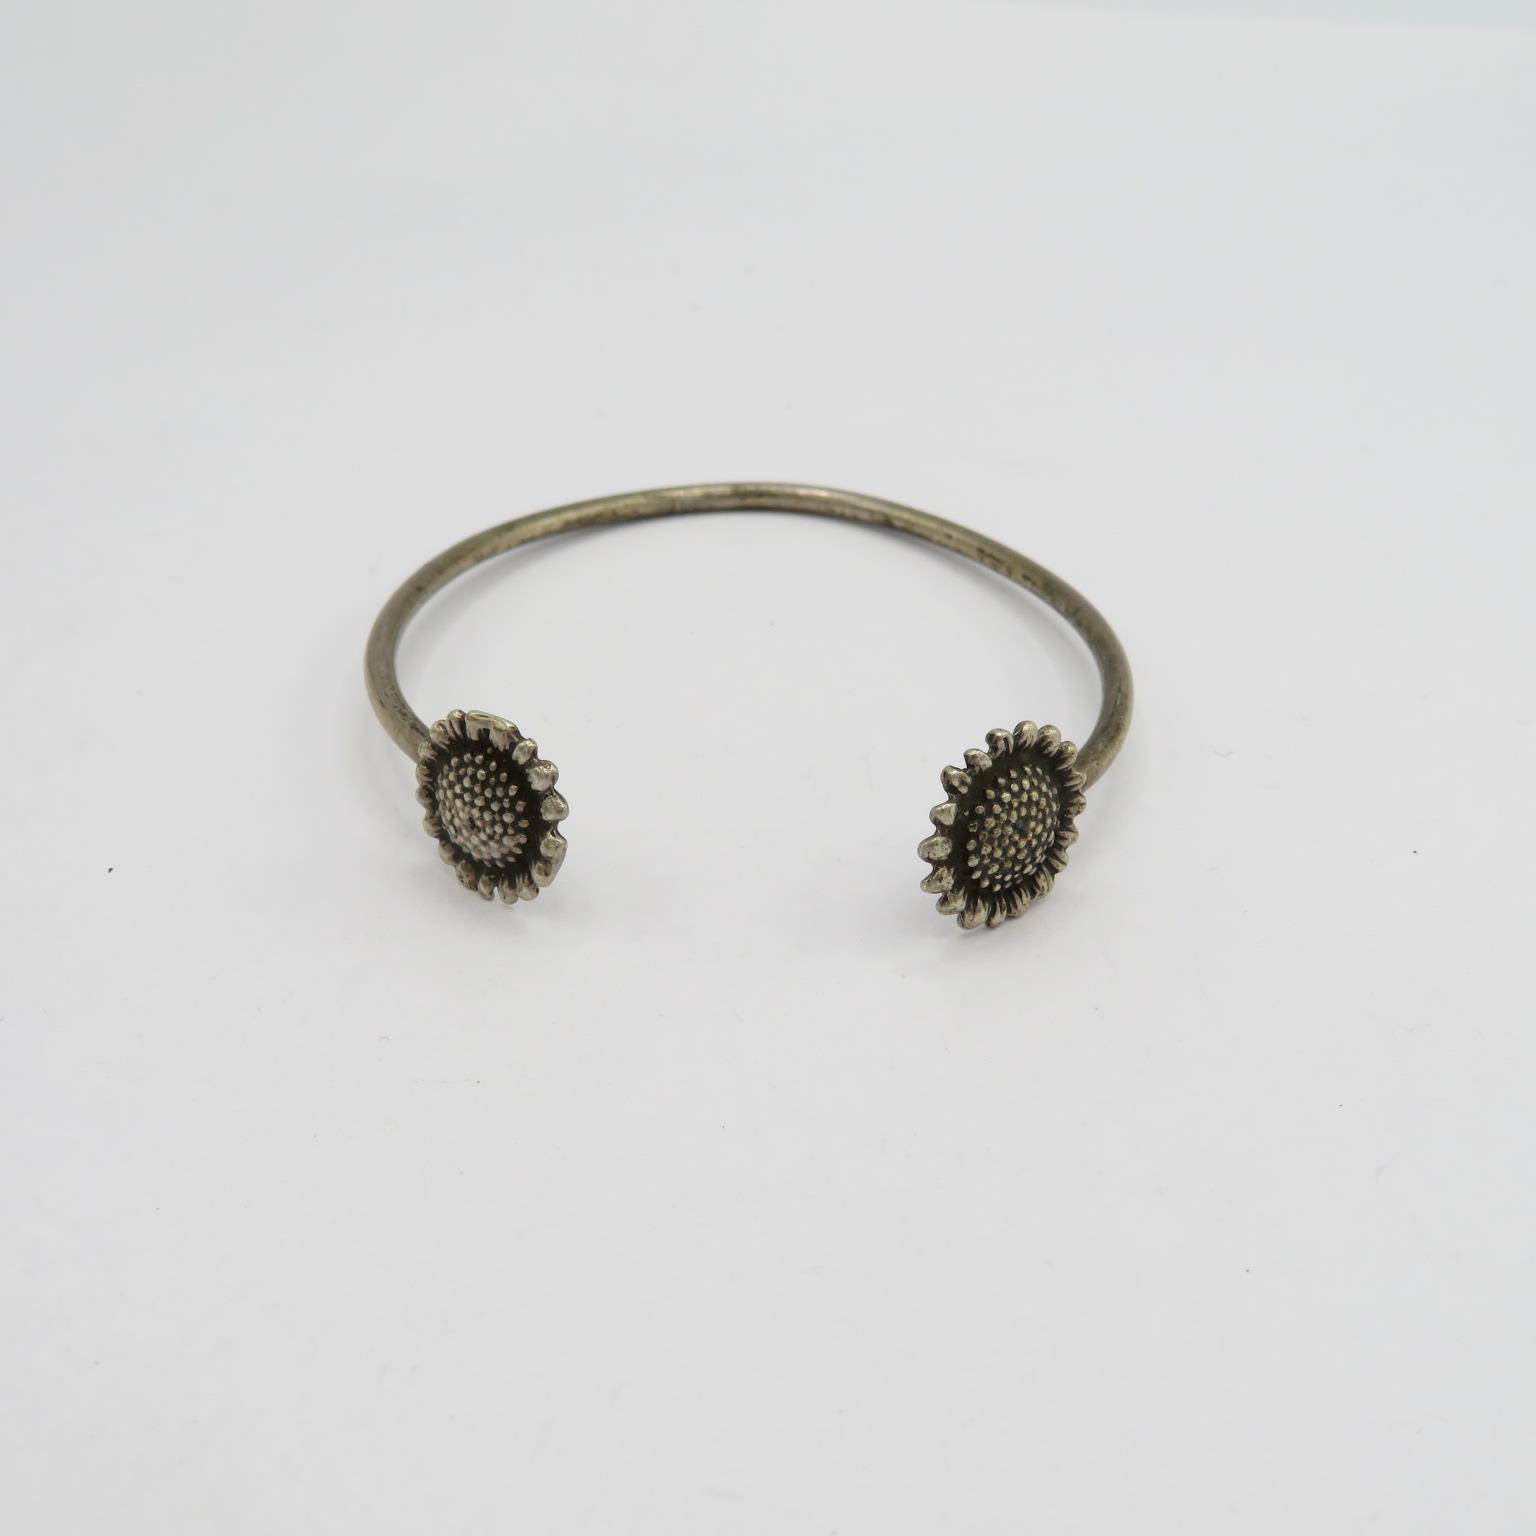 2 silver bangles one daisy ending and one dolphin ending 20.5g - Image 5 of 7